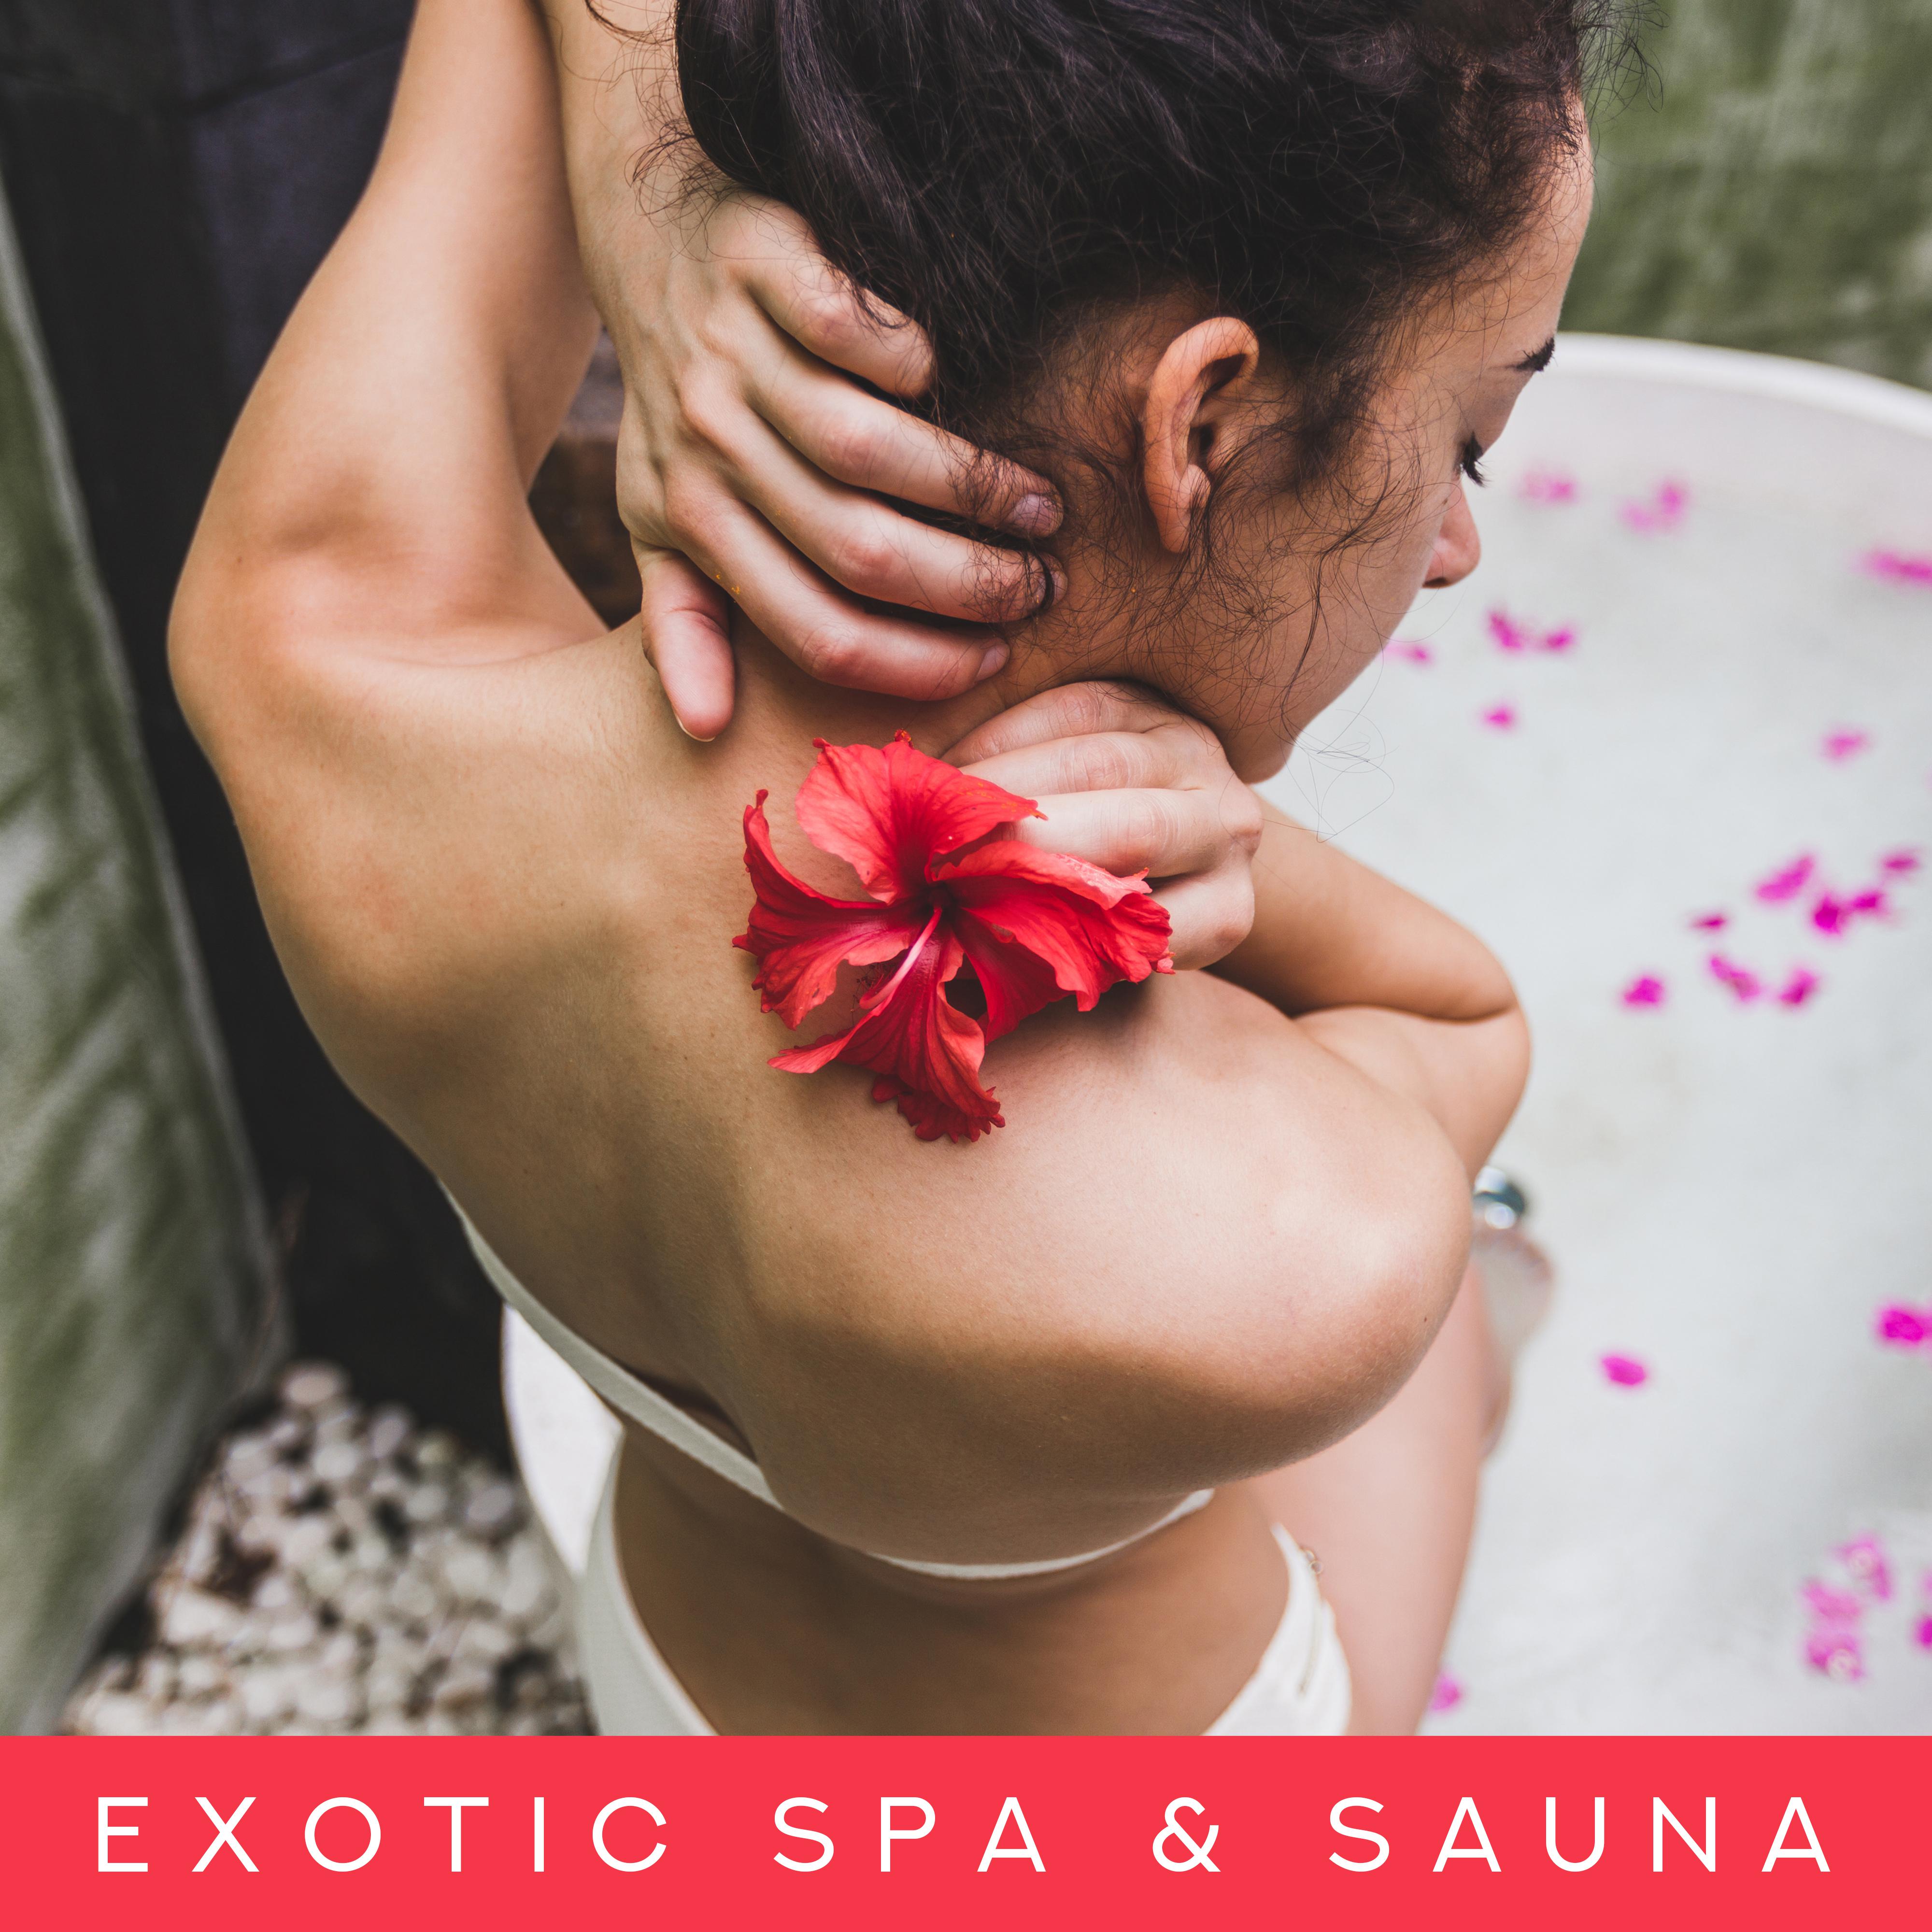 Exotic Spa & Sauna - Relaxing New Age Tunes for Spa, Massage and Beauty Treatments